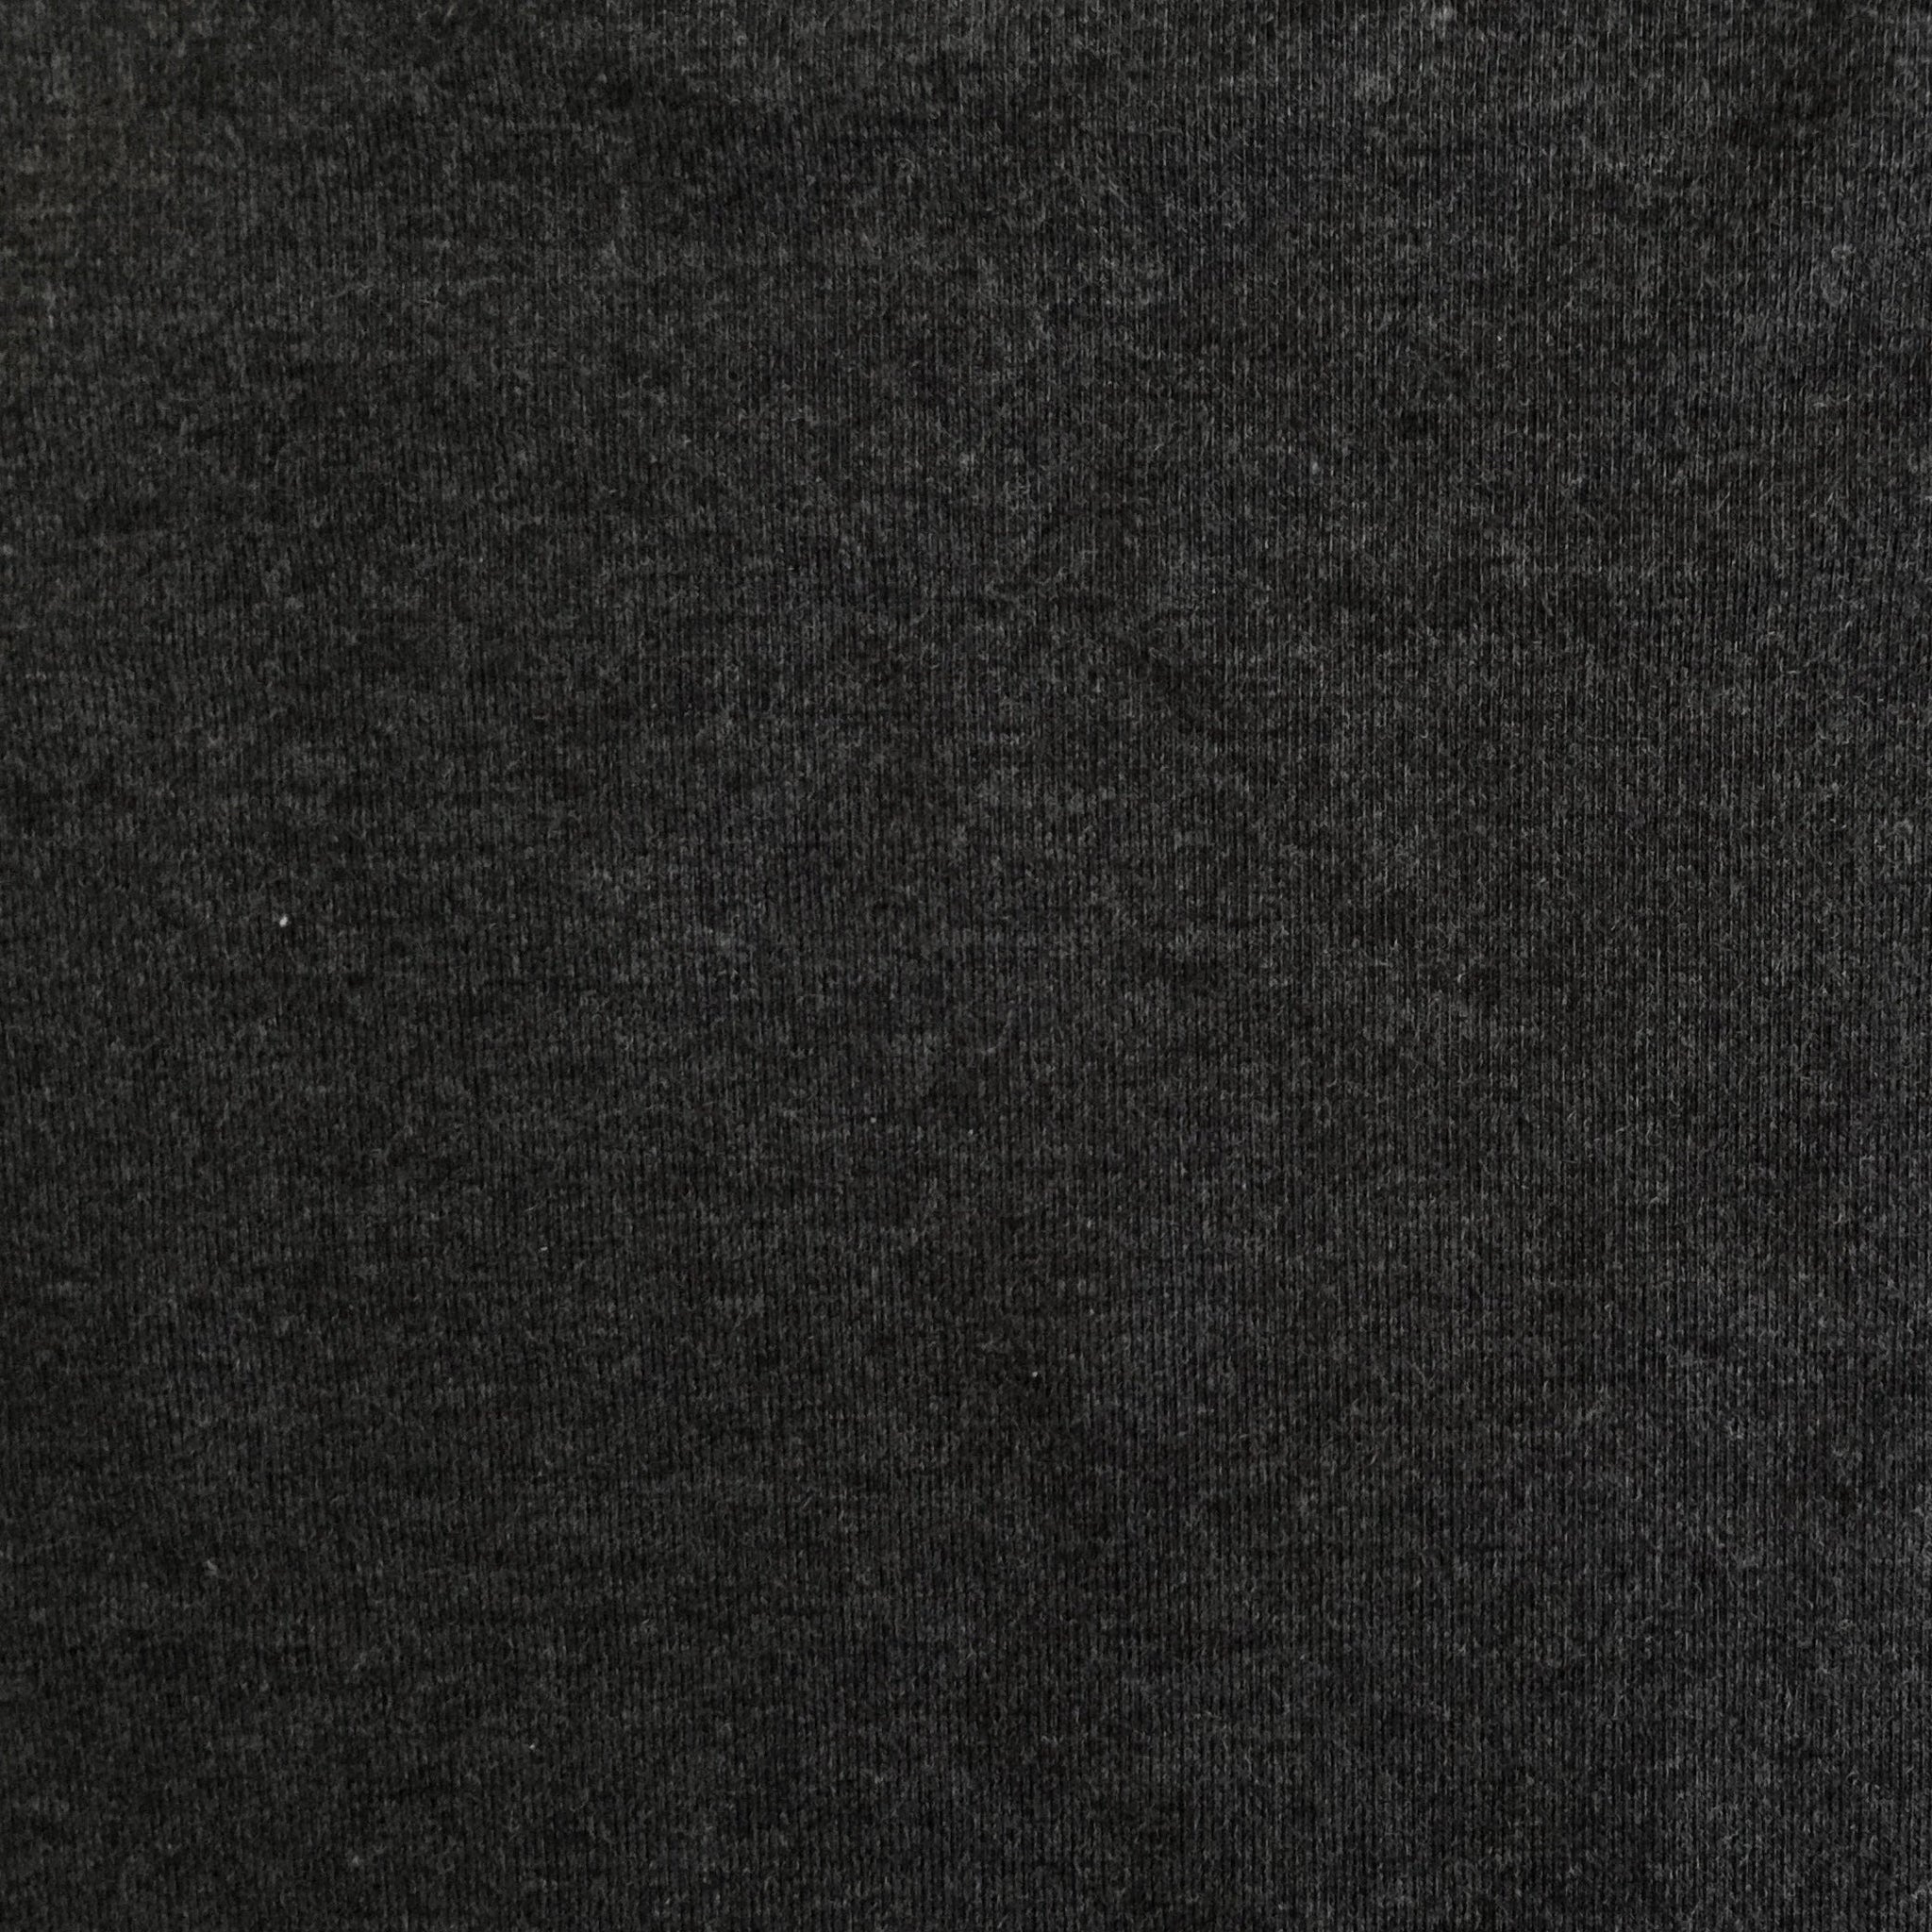 Pickering-Bamboo Jersey Heather Black, 95% Bamboo Viscose / 5% Spandex, 8.5oz-fabric-gather here online